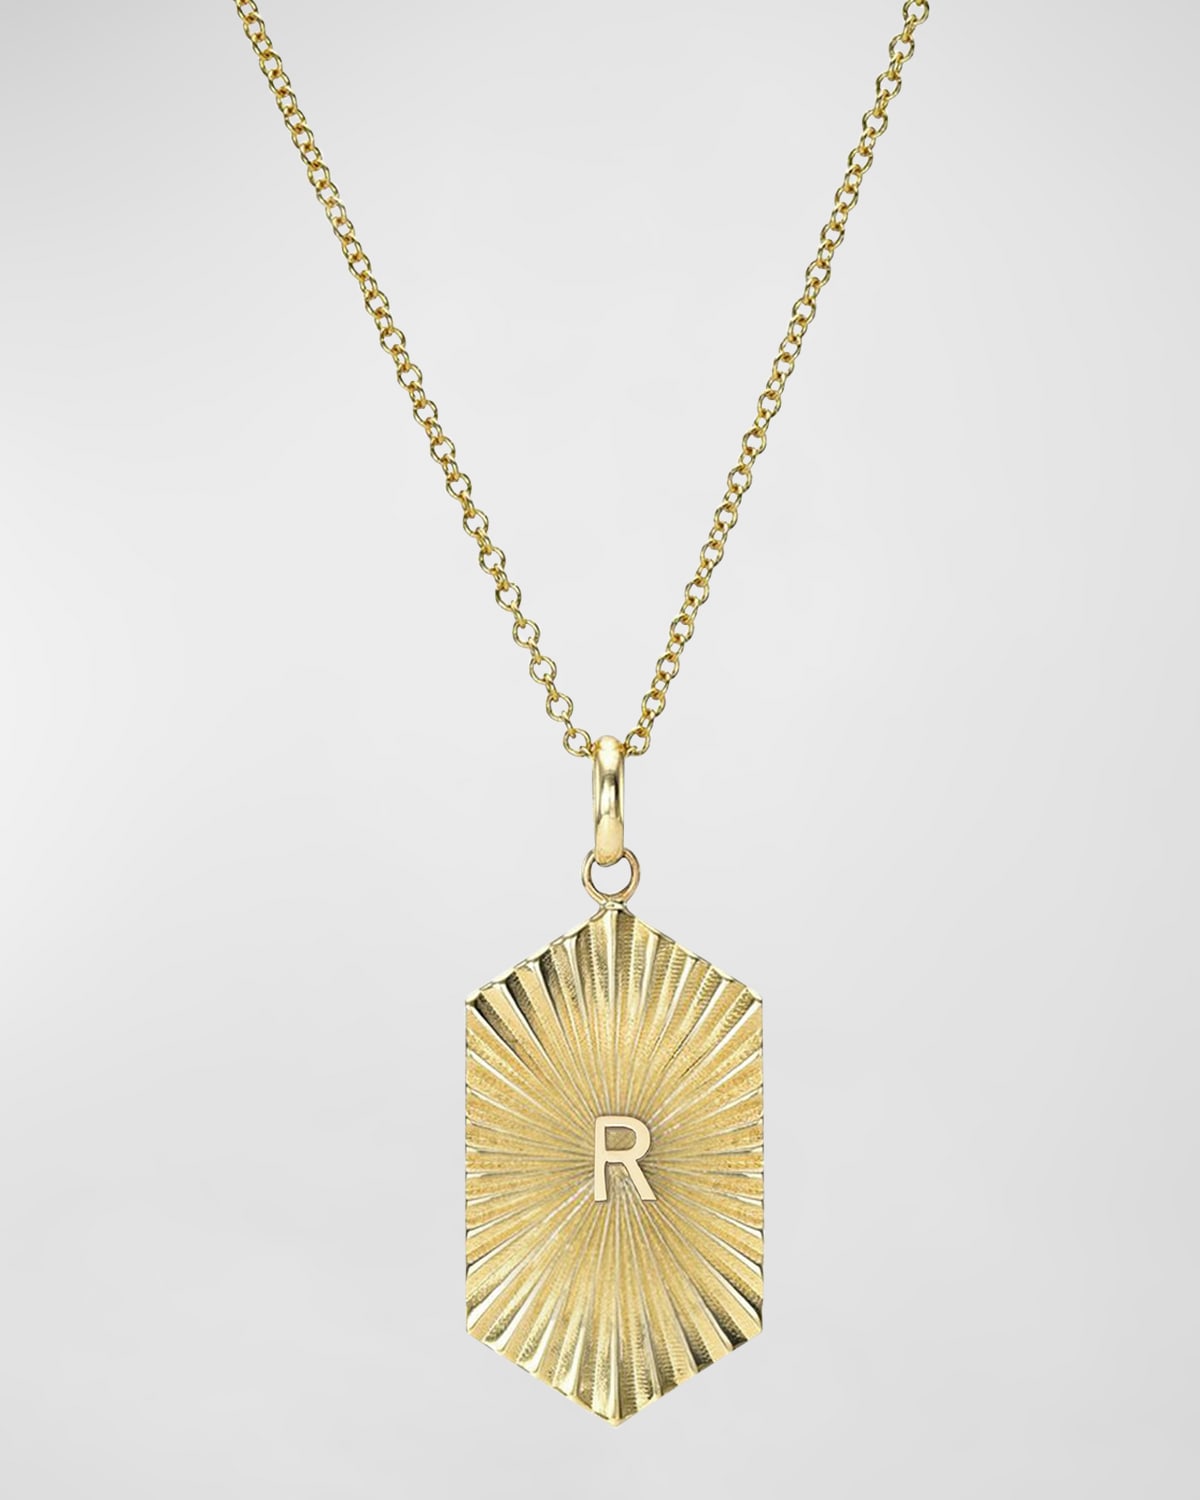 Zoe Lev Jewelry 14k Gold Pleated Shield With Initial Necklace In R